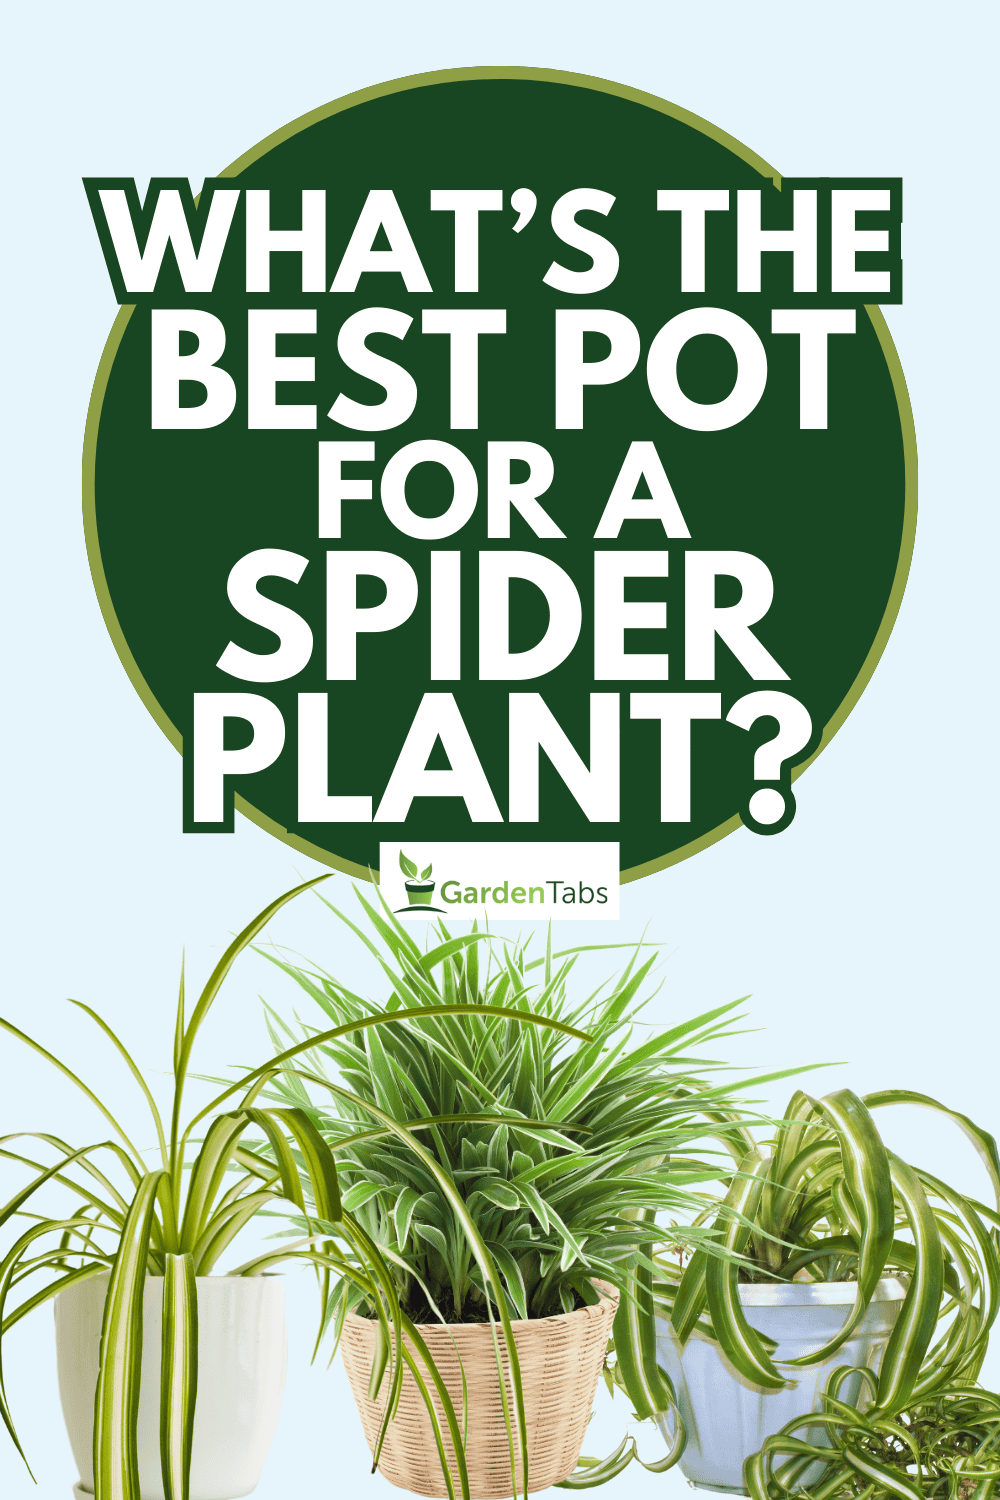 What's the best pot for a spider plant